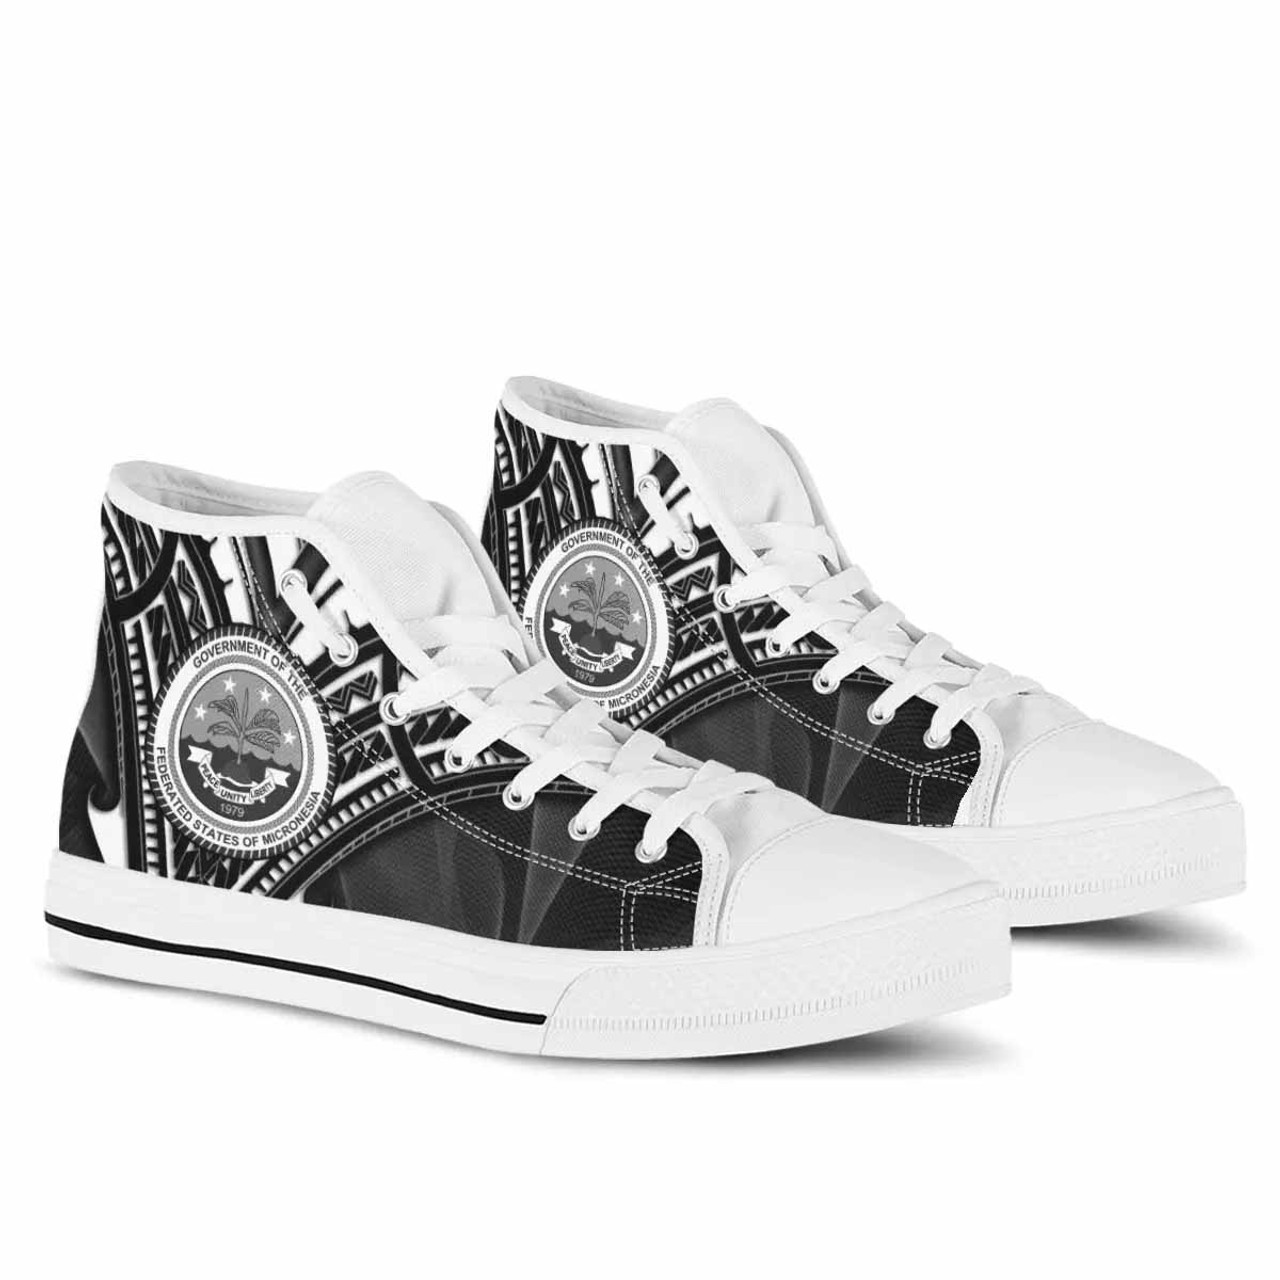 Federated States of Micronesia High Top Shoes - Cross Style 7